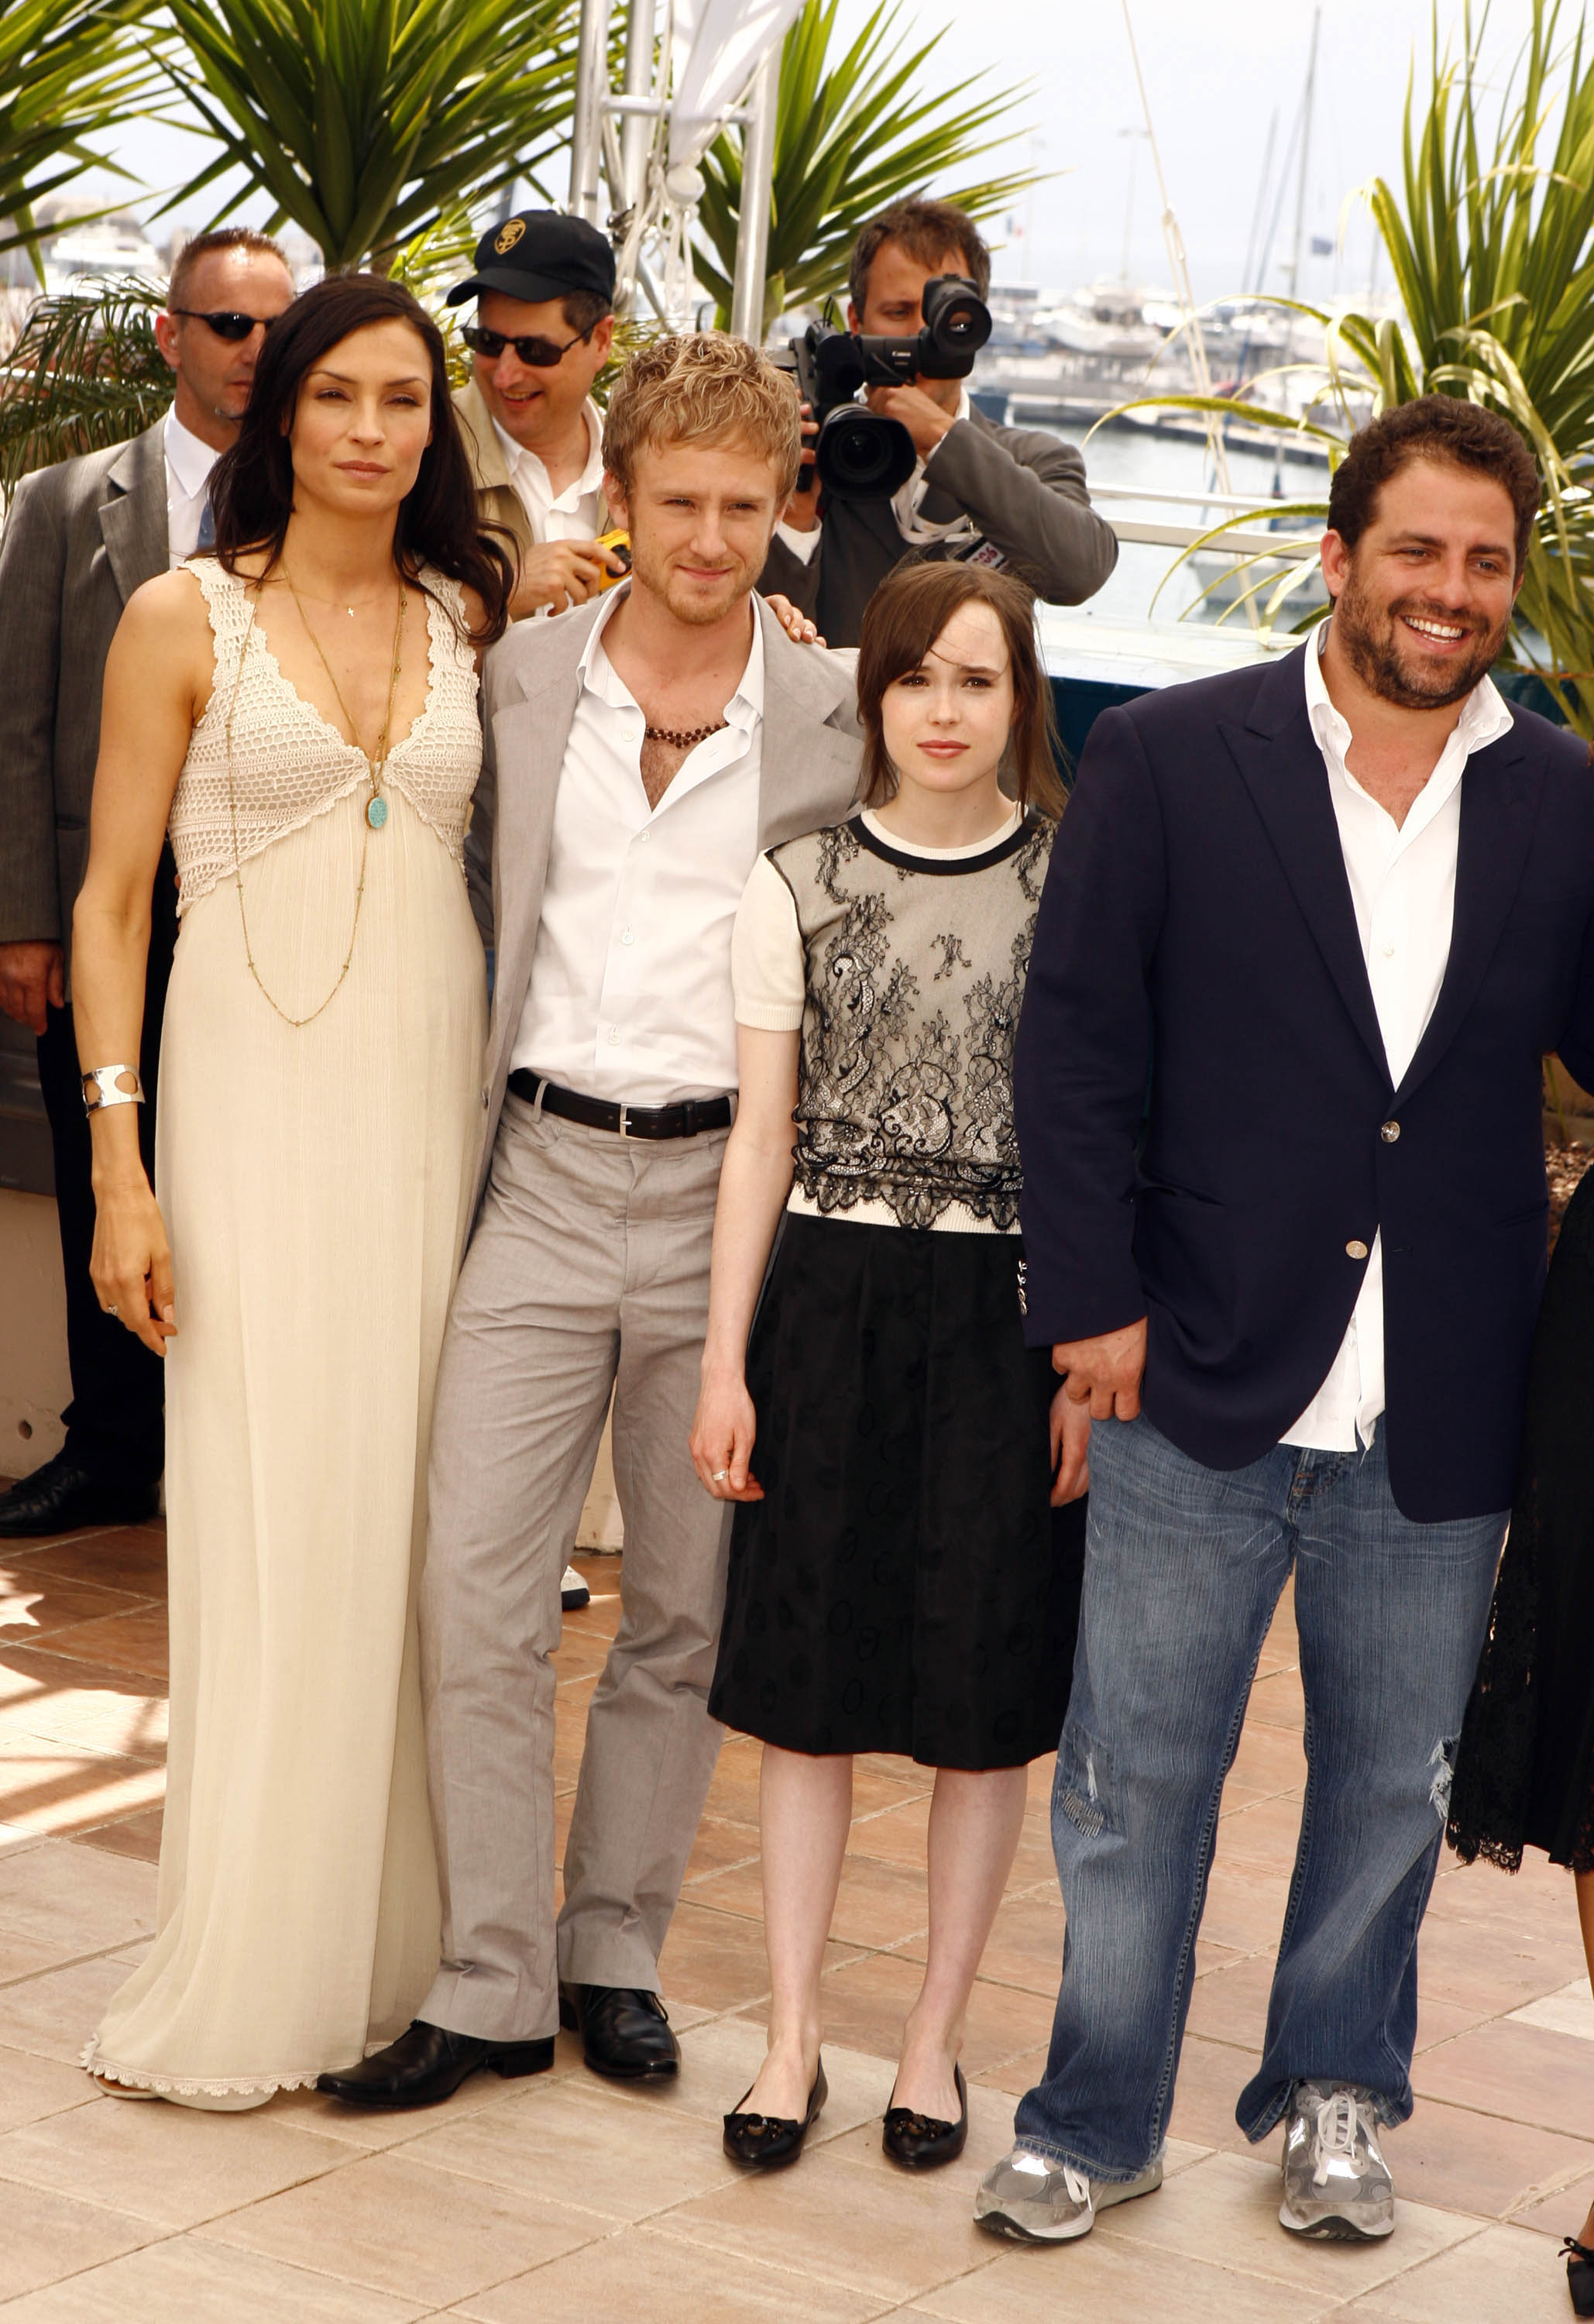 Elliot Page poses with Famke Janssen, Ben Foster, and Brett Ratner during the "X-Men : The Last Stand" photocall on May 22, 2006 | Source: Getty Images